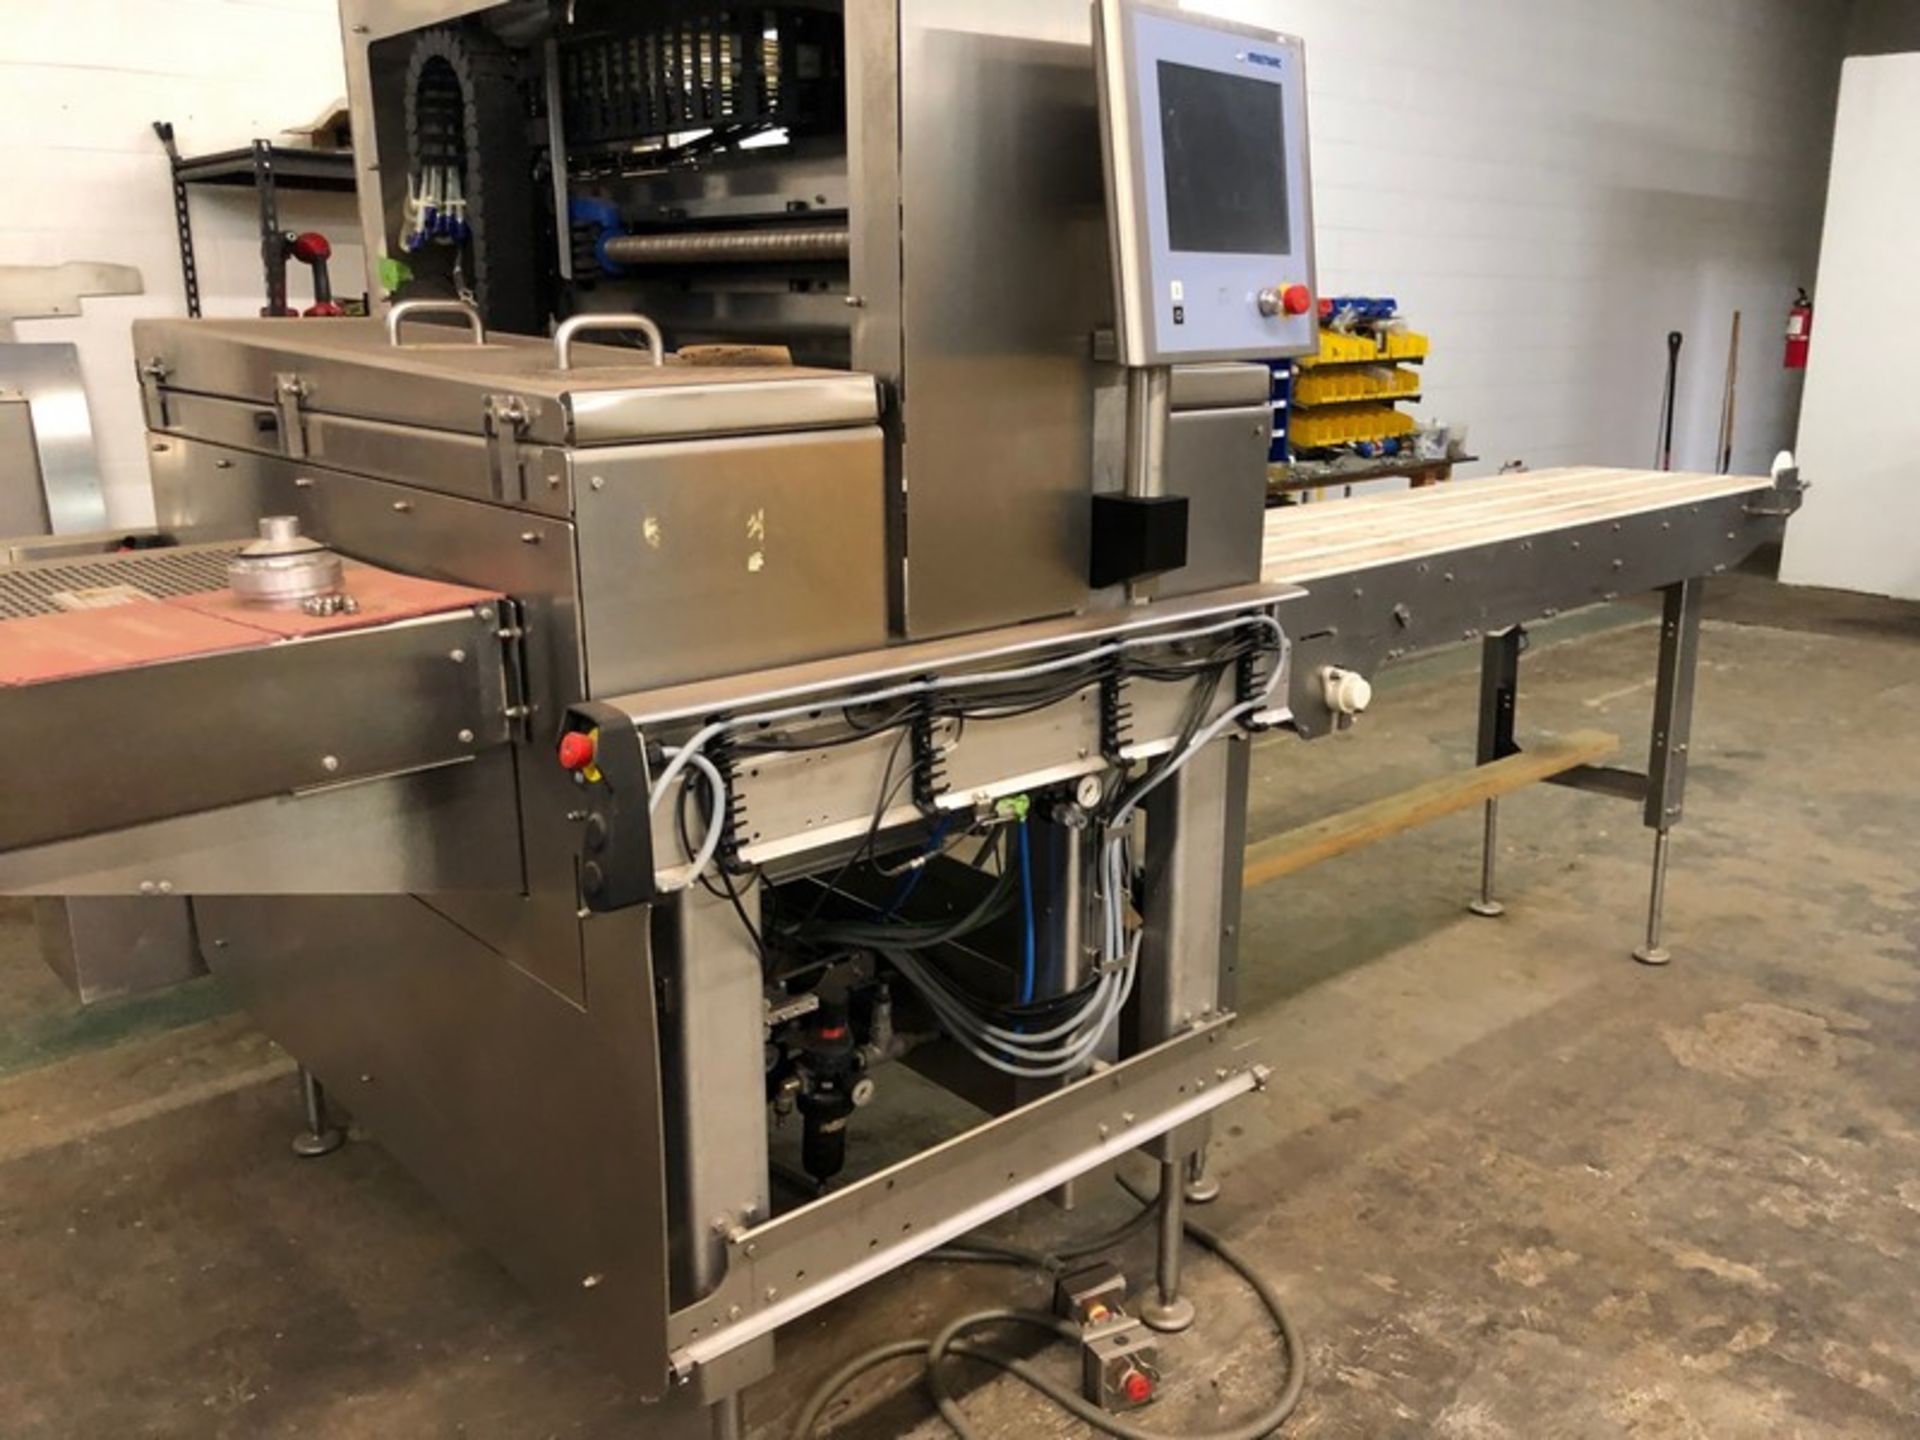 2012 MultiVac Vacuum Packager, M/N H050, S/N 158613, 208 Volts, 1 Phase (LOCATED IN BELTSVILLE, MD) - Bild 10 aus 10